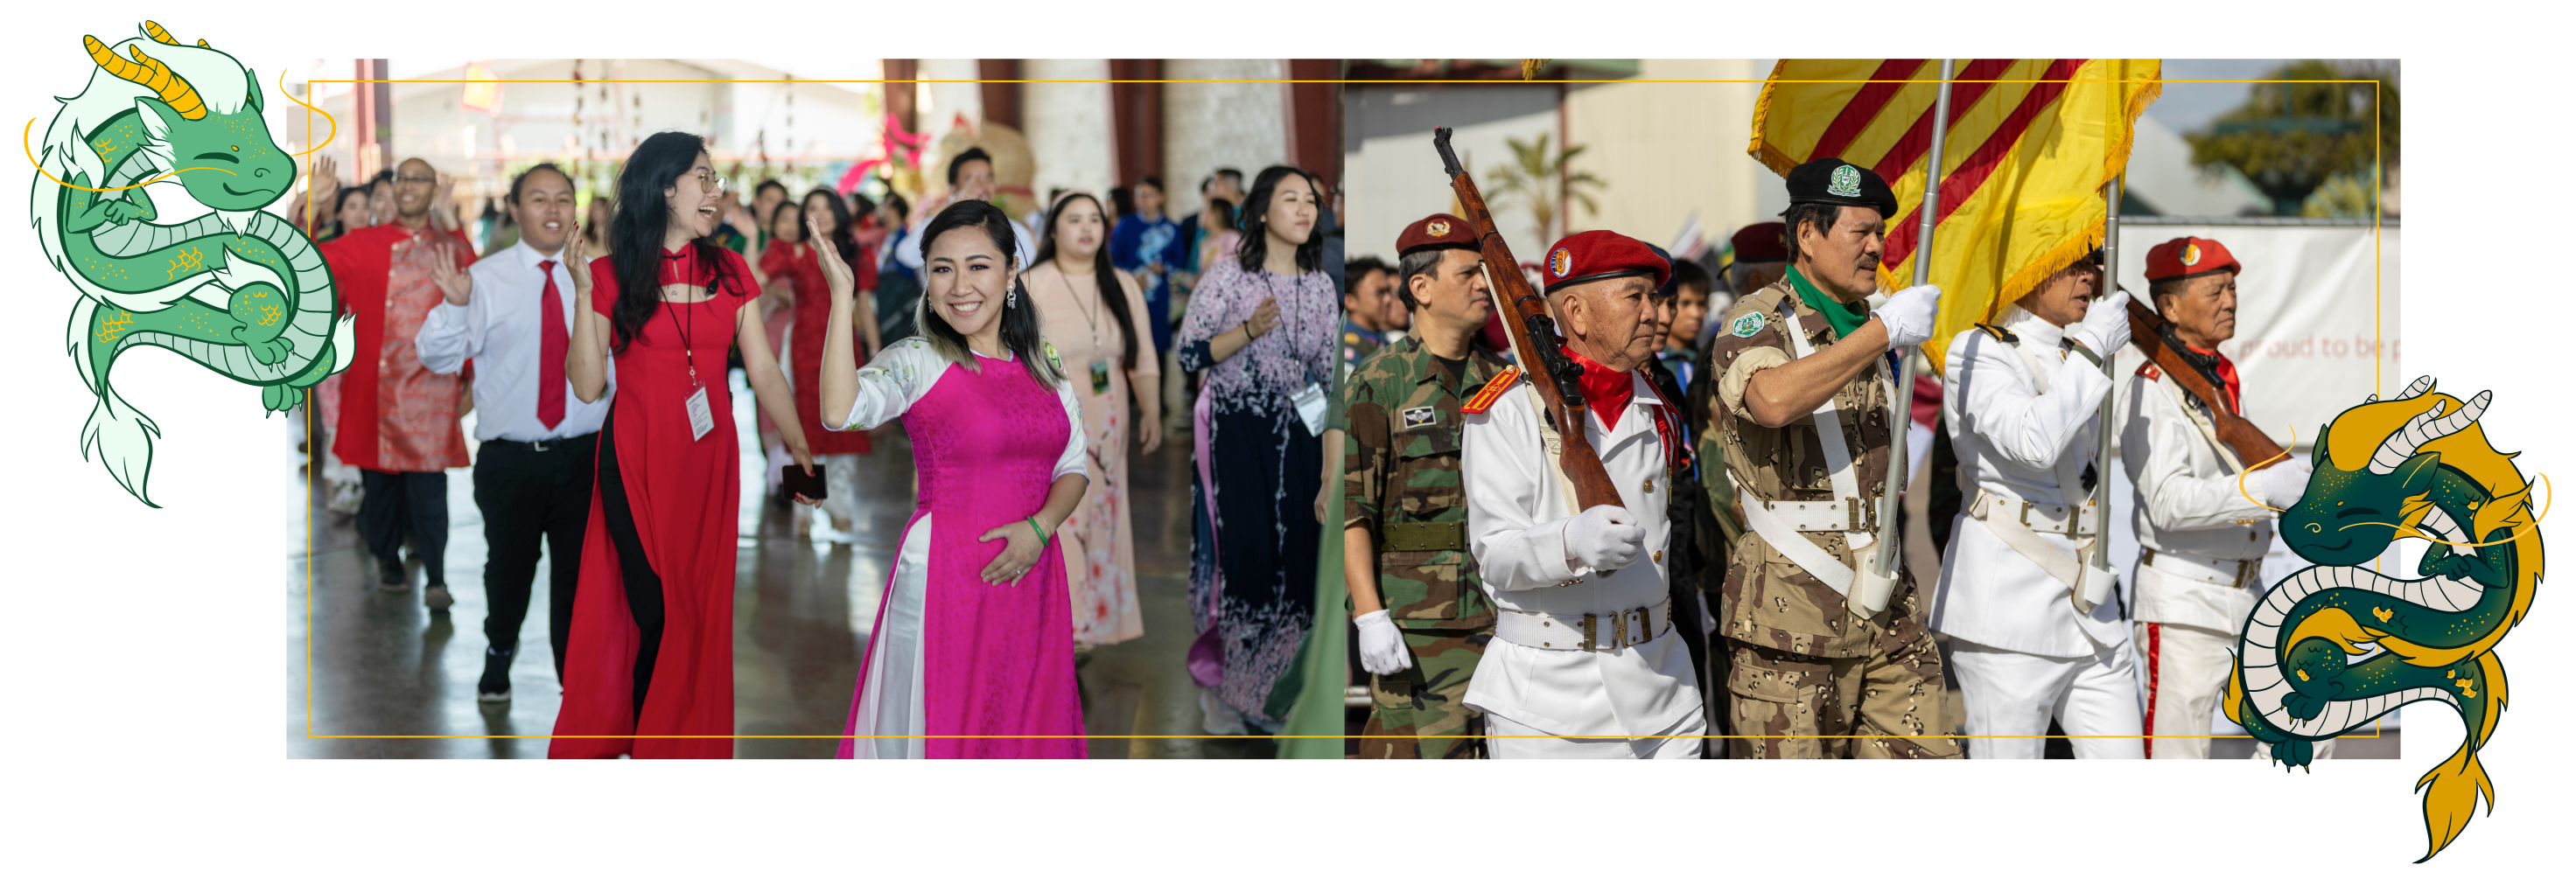 Participants in traditional Vietnamese attire dance and march in a procession, with military personnel in uniform carrying flags. A cultural or national celebration.